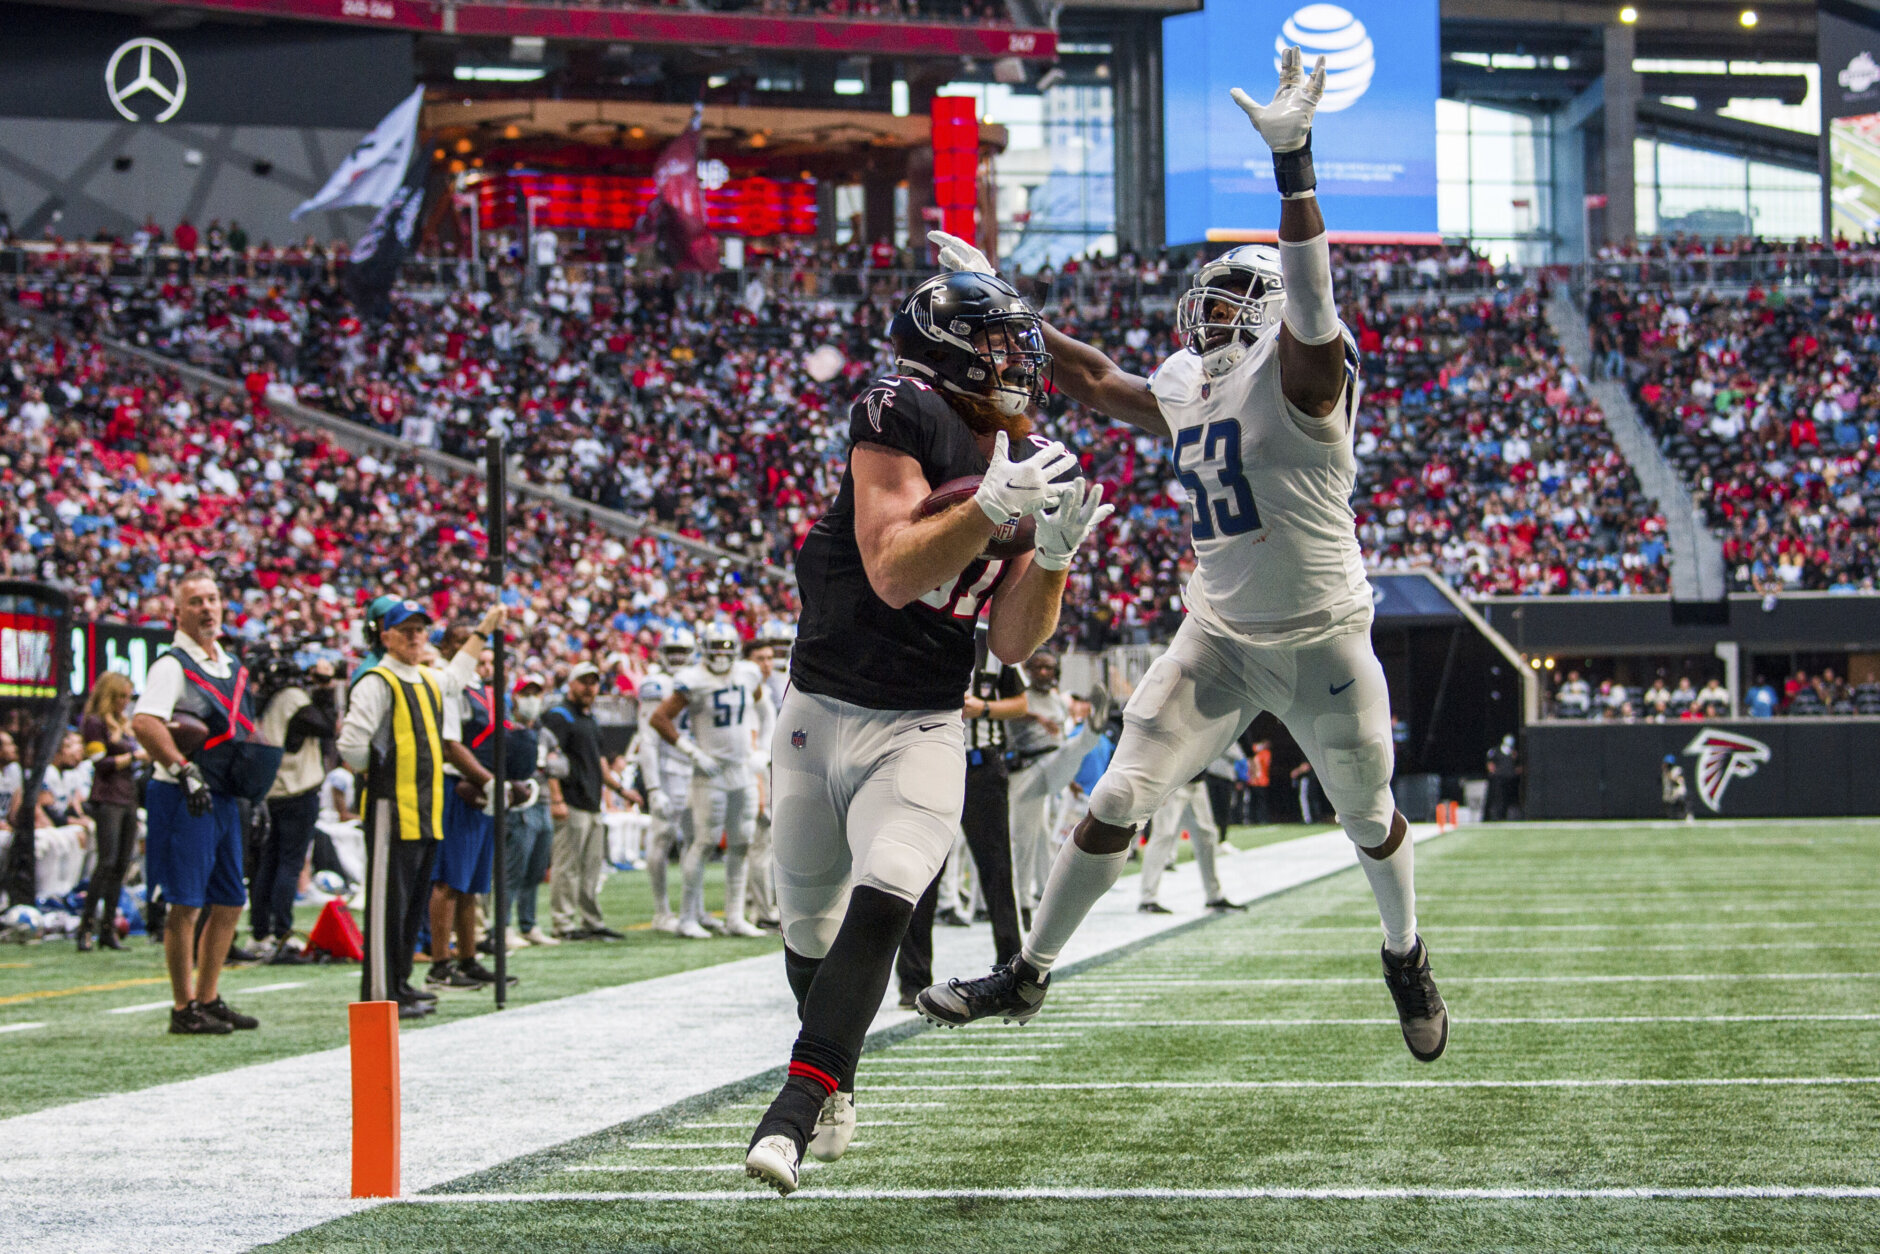 <p><em><strong>Lions 16</strong></em><br />
<em><strong>Falcons 20</strong></em></p>
<p>Atlanta picked the right time to win its first home game of the season, keeping their playoff hopes alive for at least another week. But does a team that barely beat two-win Detroit and went 1-5 in its own building deserve to be in the postseason? Methinks not.</p>
